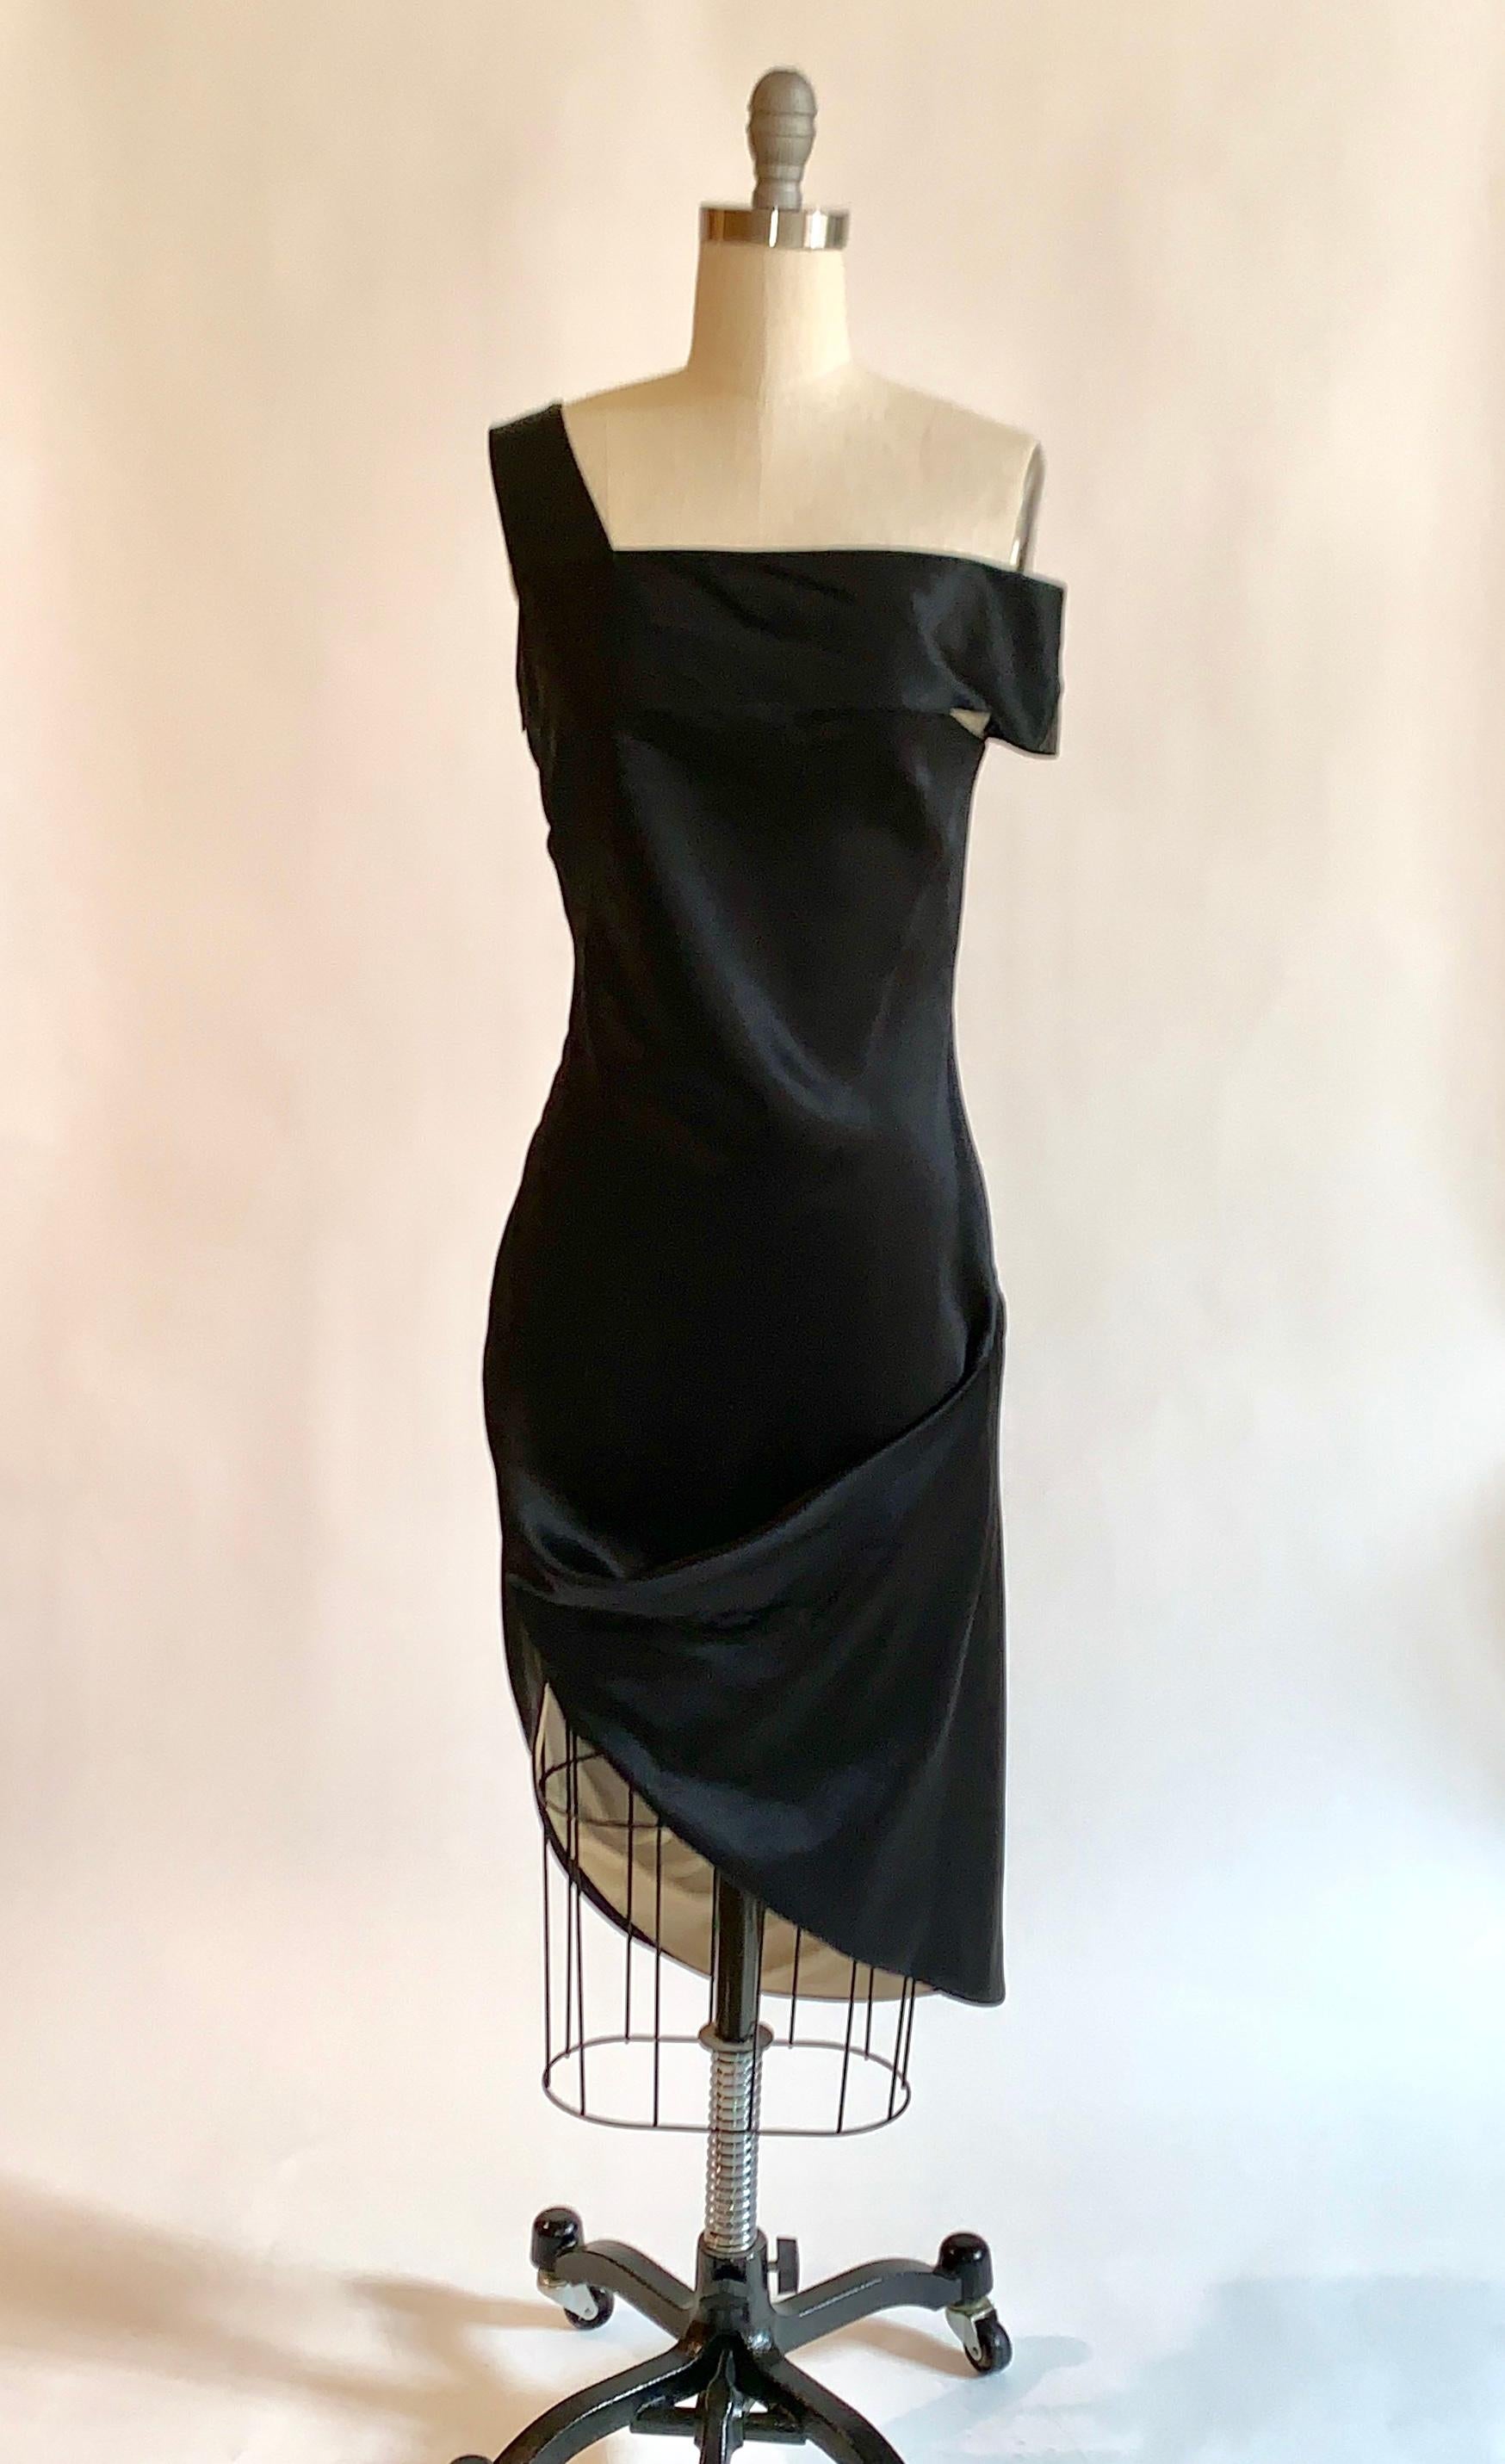 Alexander McQueen black and nude silk dress with asymmetrical neckline (one strap falls just off the shoulder) and drape at skirt from his 2008 collection. Back of skirt is just longer than the front, so that it shows a flash of nude lining when